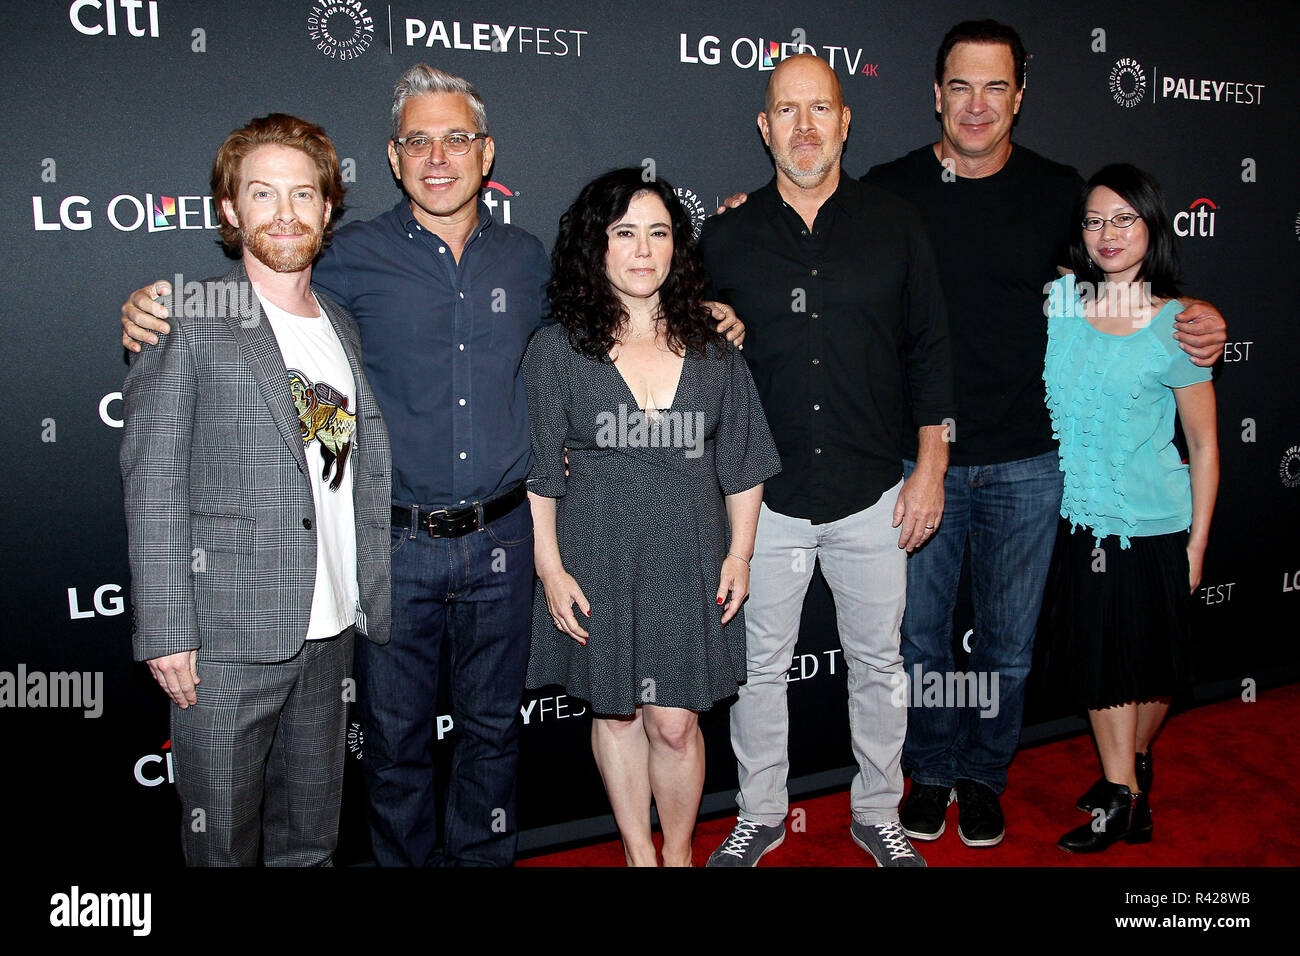 NEW YORK, NY - OCTOBER 07:  Actor Seth Green,  writer/producer Richard Appel, actors Alex Borstein, Mike Henry, Patrick Warburton and moderator Cherry Chevapravatdumrong attend 'Family Guy' during the PaleyFest NY 2017 at The Paley Center for Media on October 7, 2017 in New York City.  (Photo by Steve Mack/S.D. Mack Pictures) Stock Photo